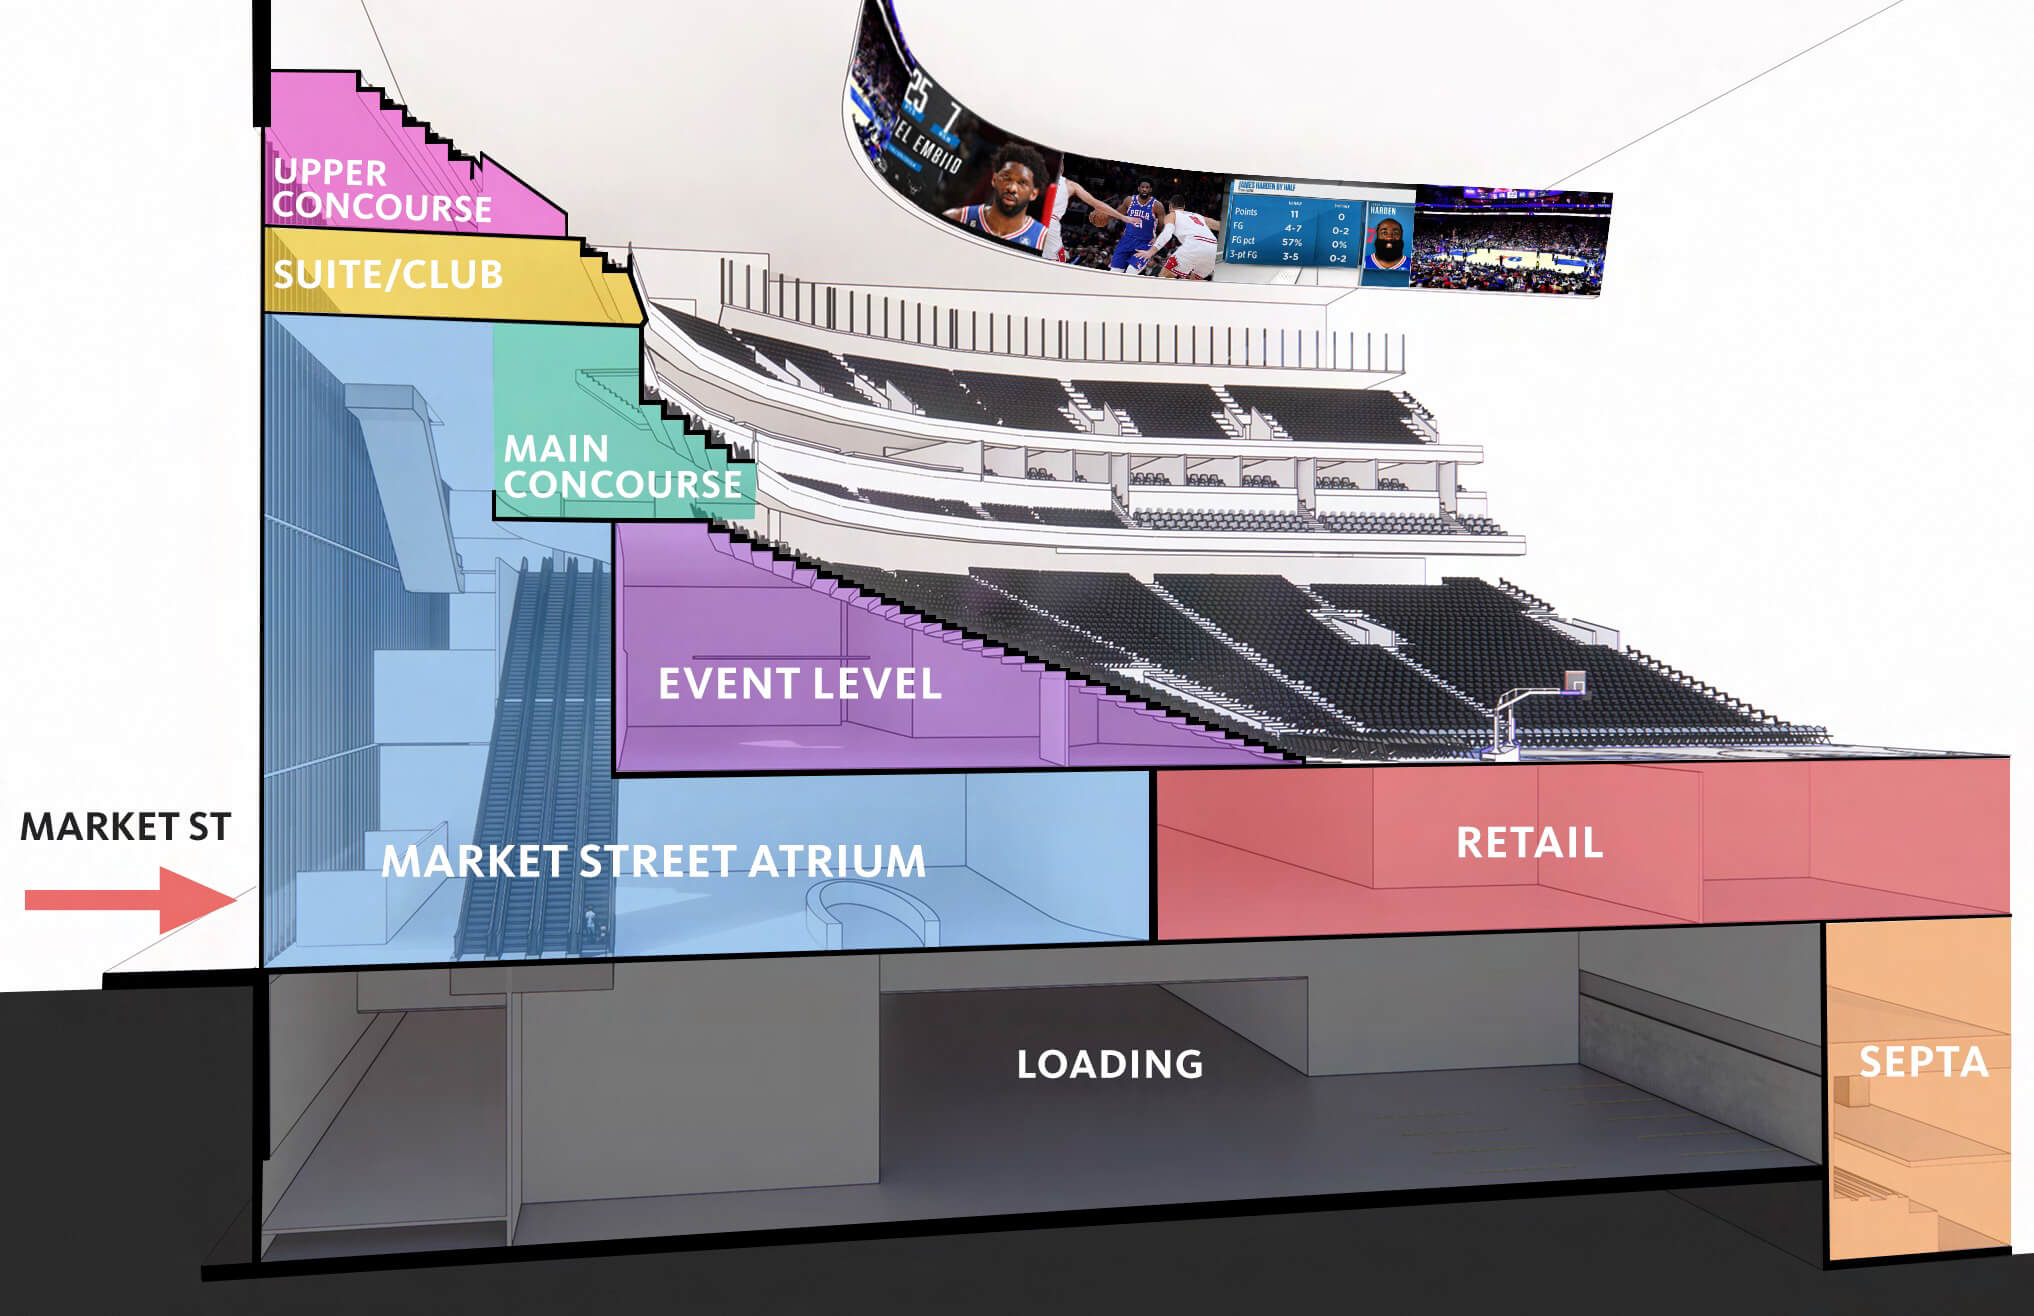 Sixers release new renderings of proposed arena project - WHYY